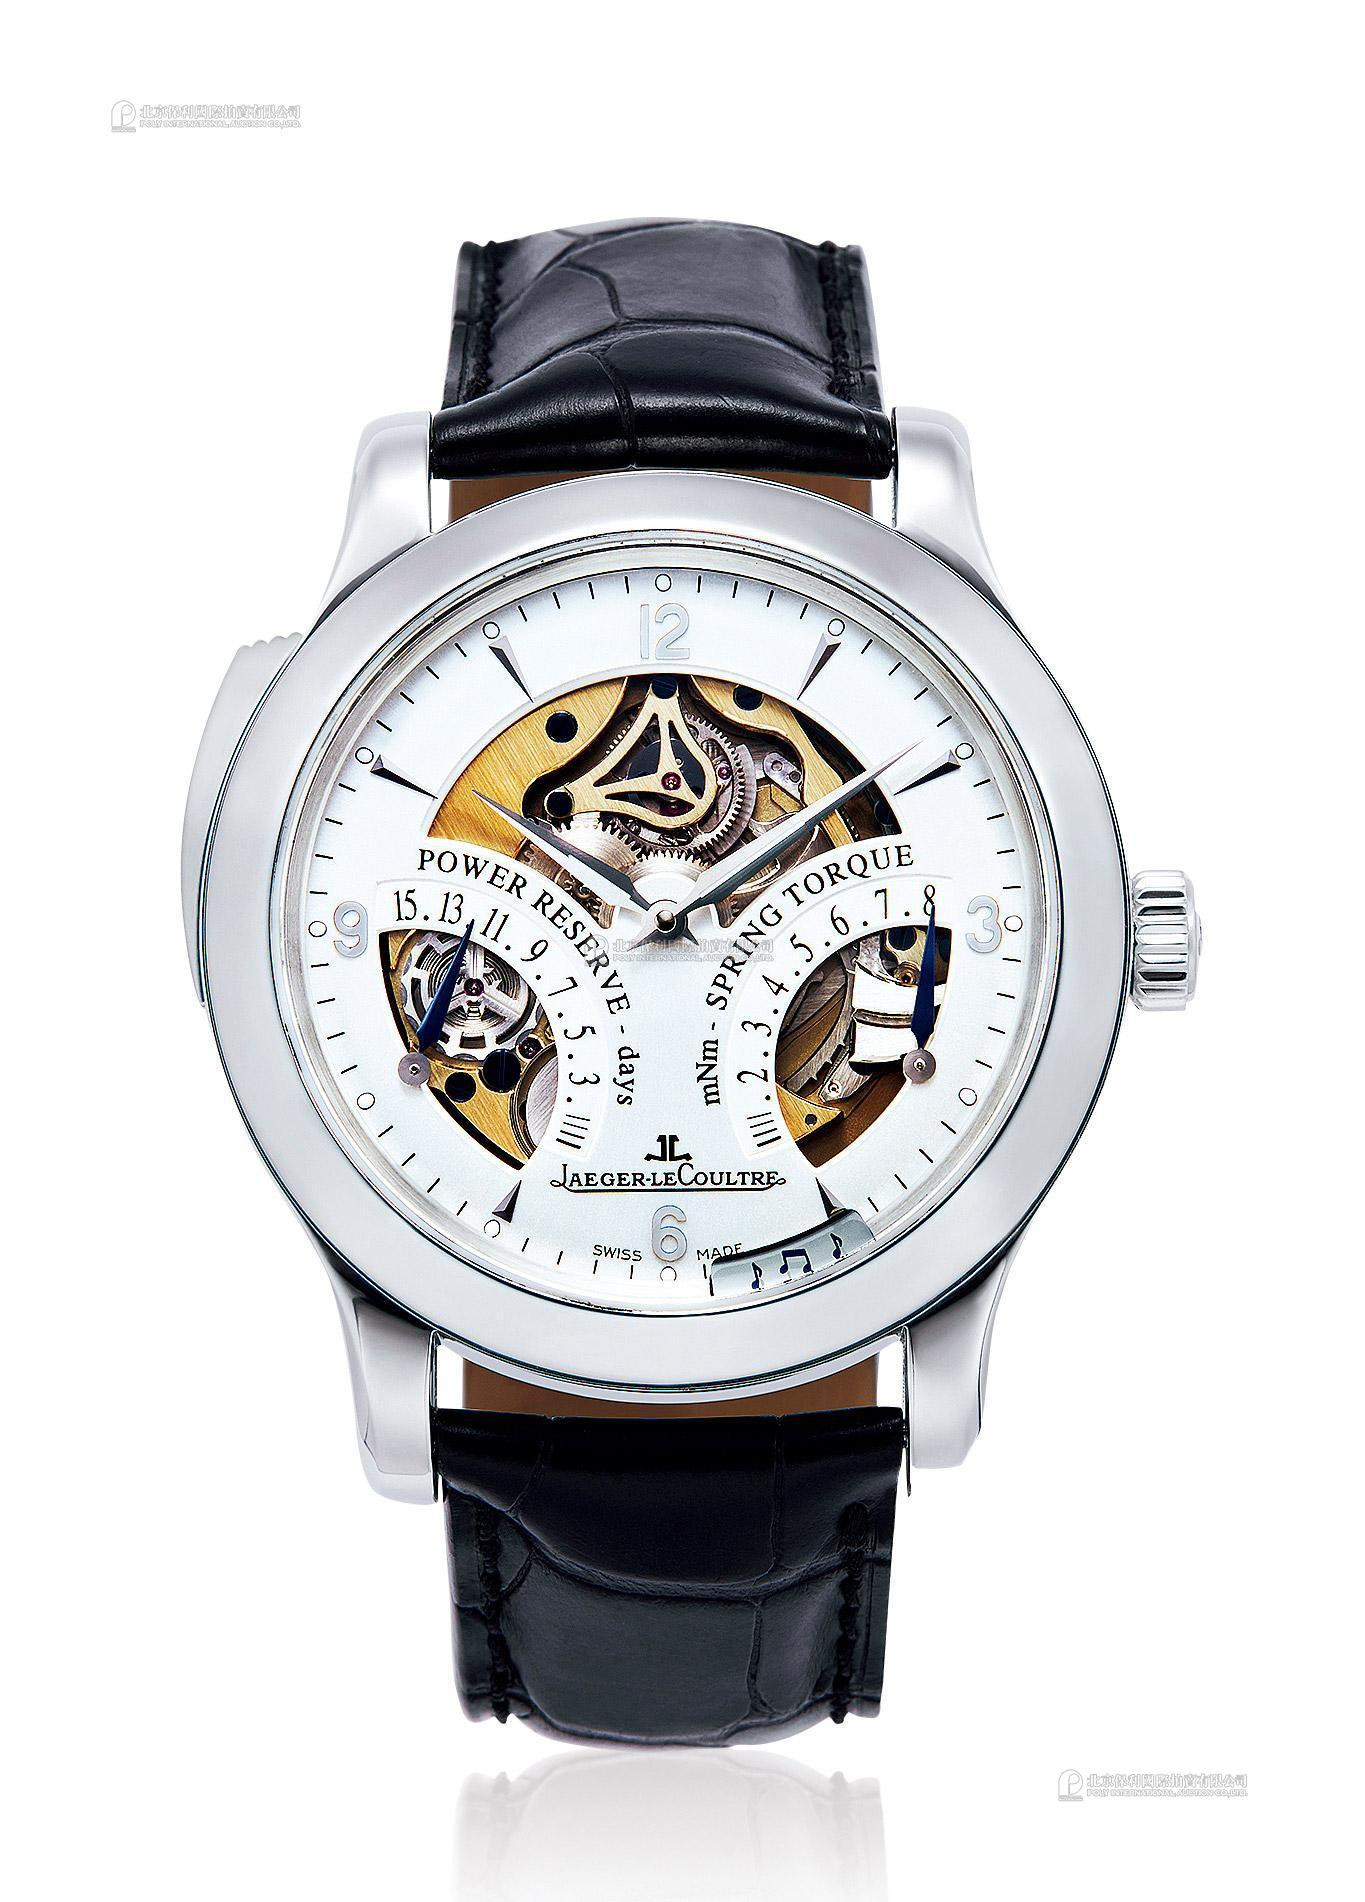 JAEGER-LECOULTRE A PLATINUM MANUALLY-WOUND WRISTWATCH WITH MINUTE REPEATING AND 15 DAYS POWER-RESERVE INDICATION